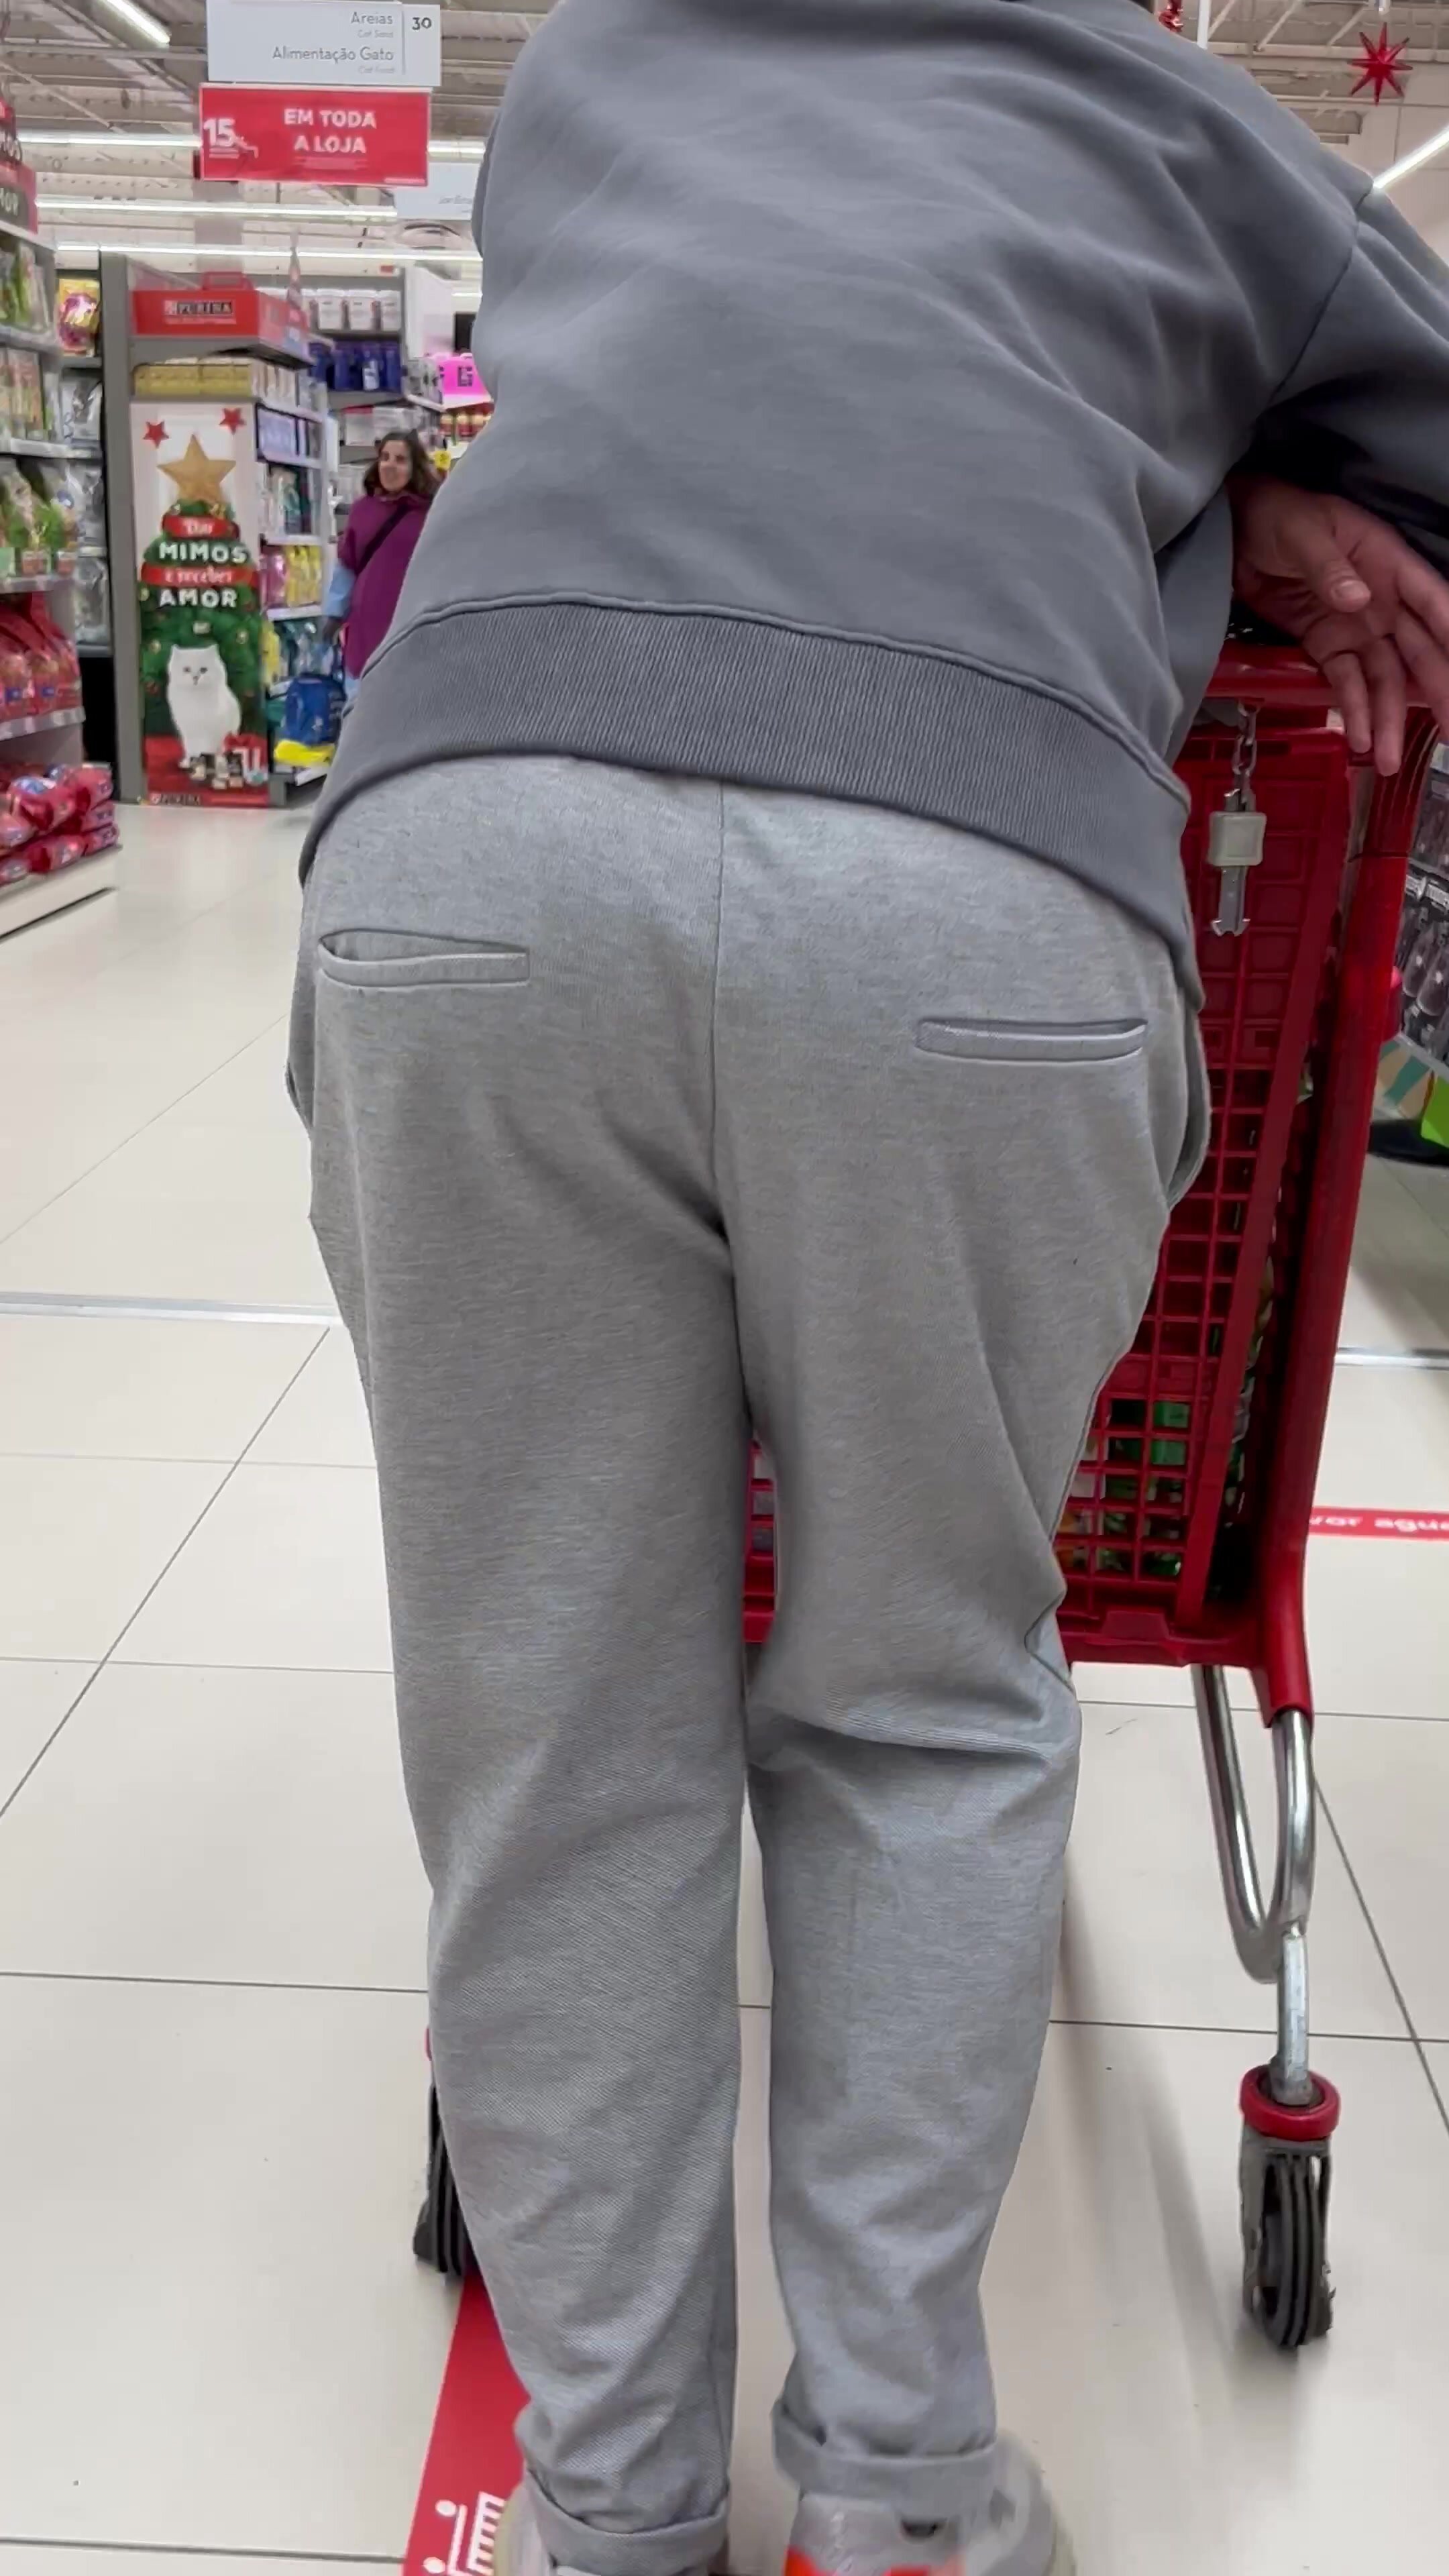 Spy Man's Ass In The Supermarket